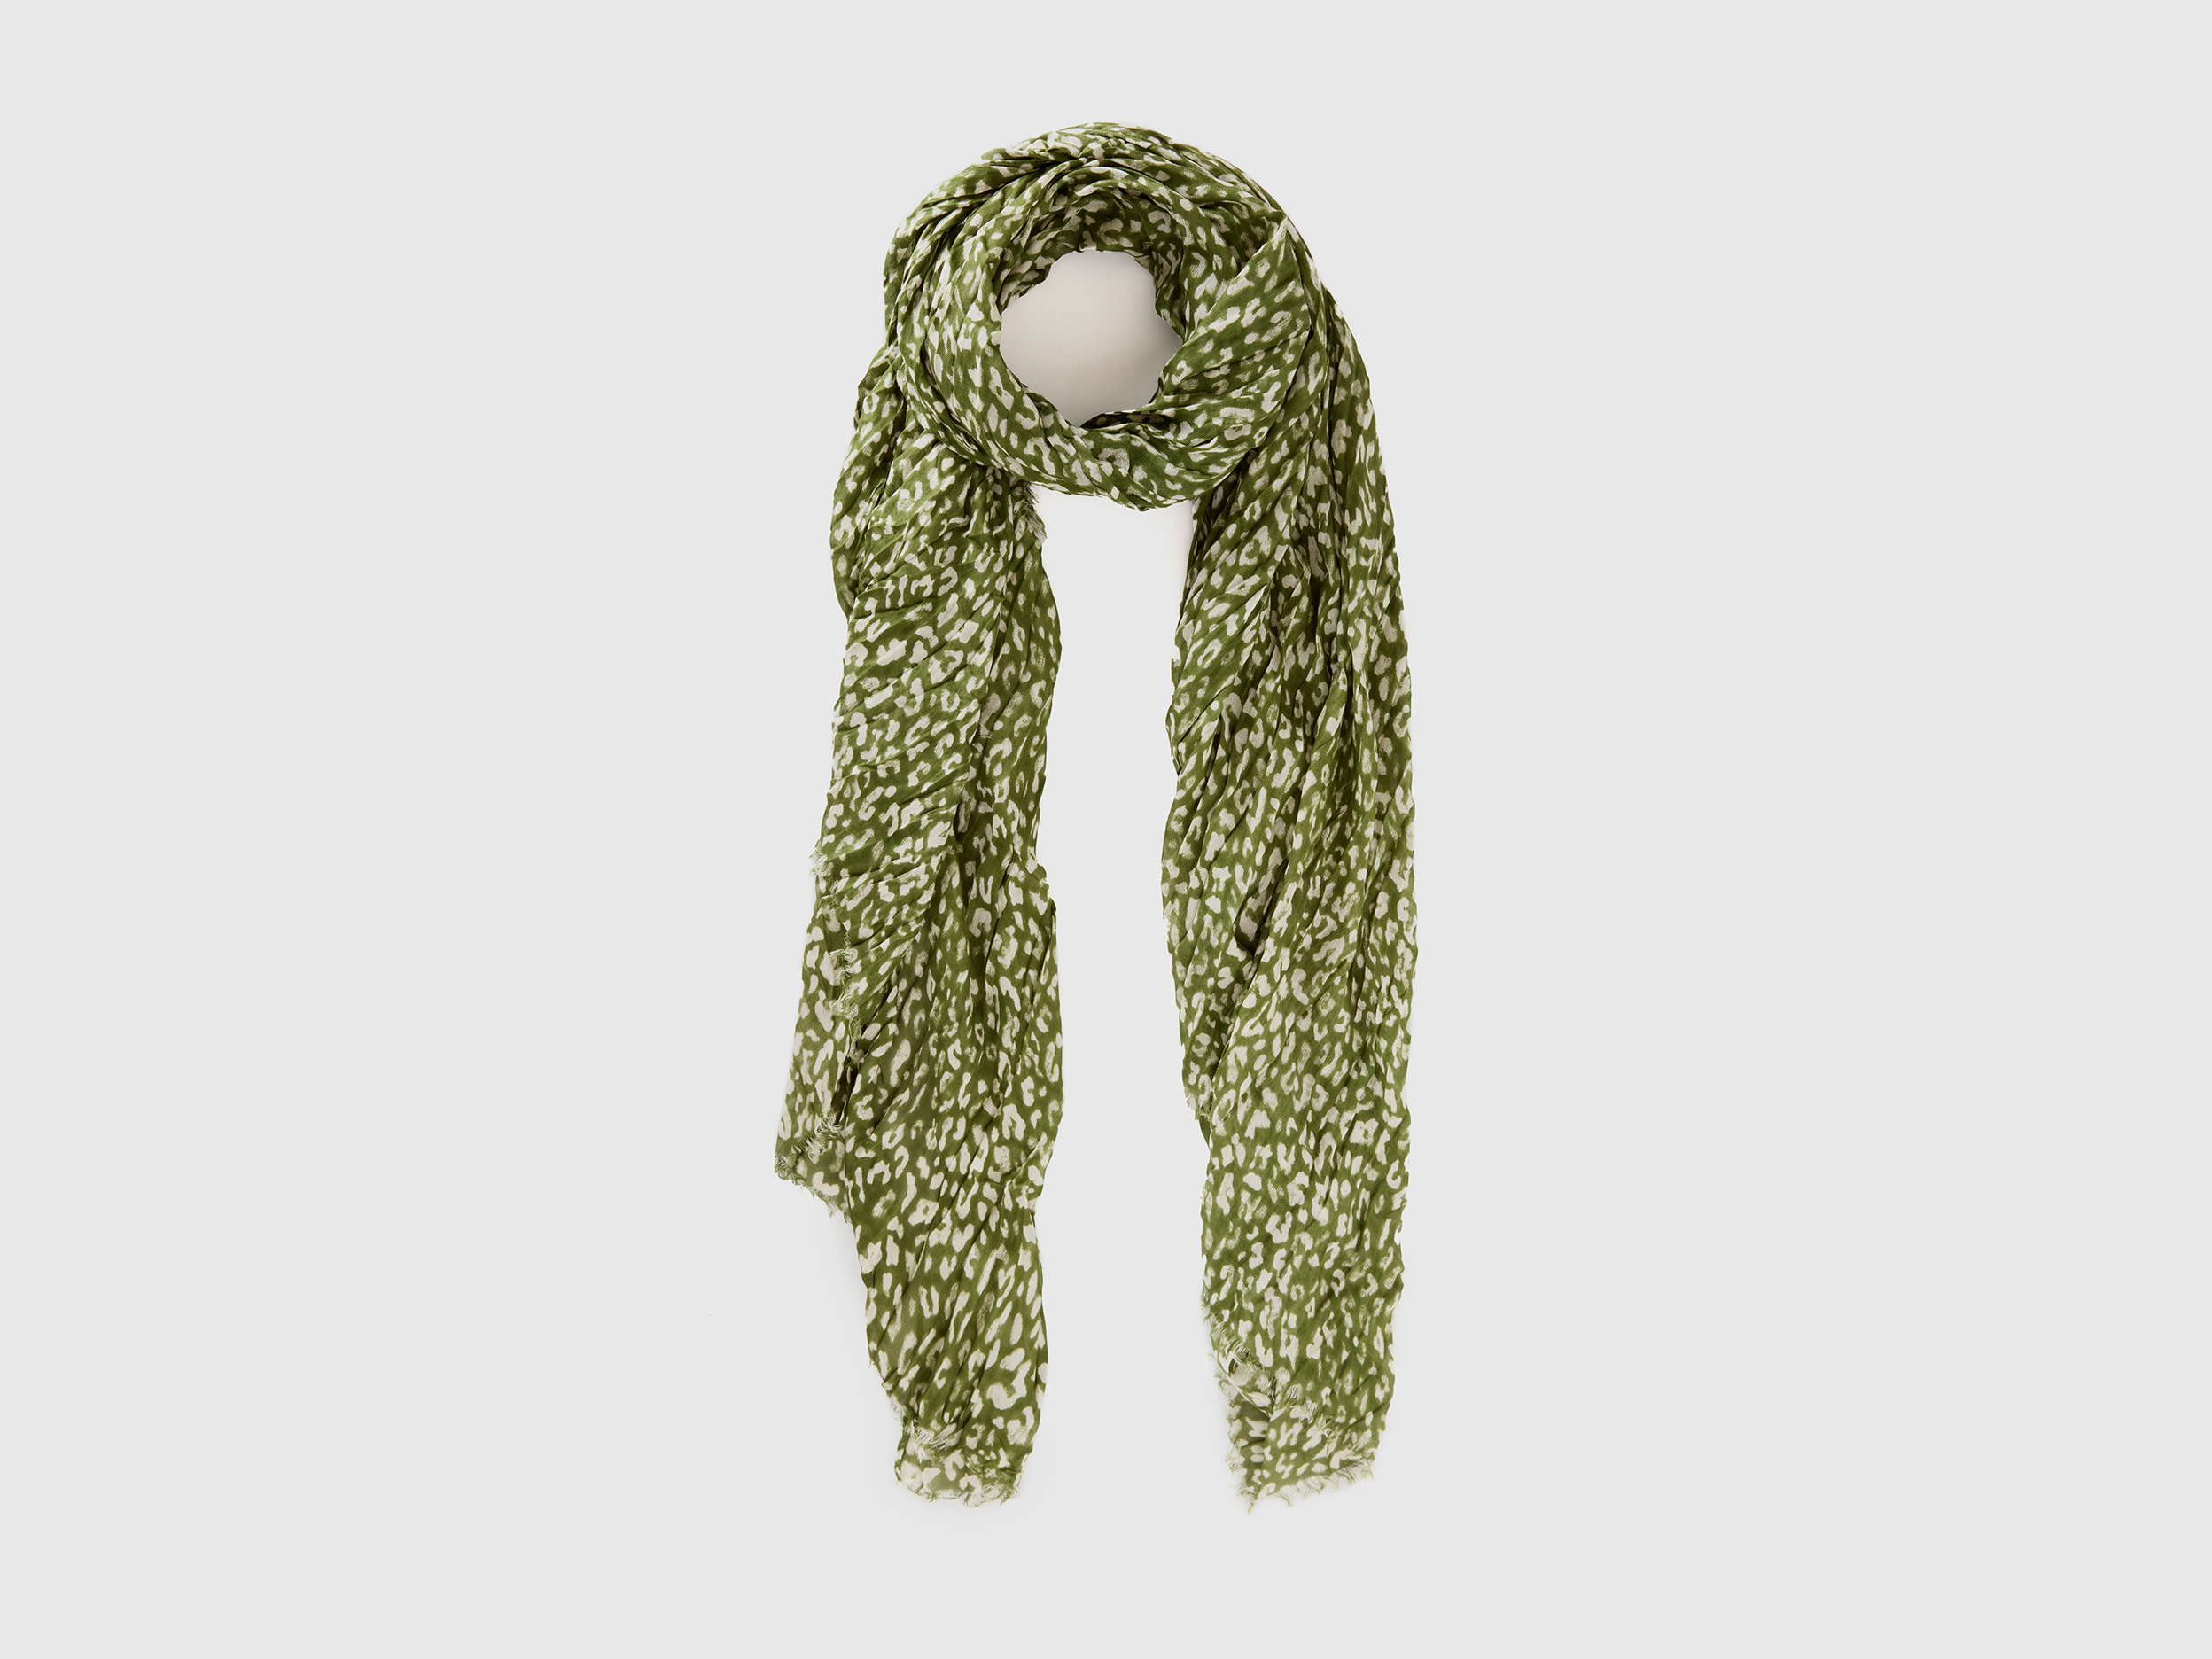 Benetton, Patterned Scarf In Sustainable Viscose, size OS, Green, Women